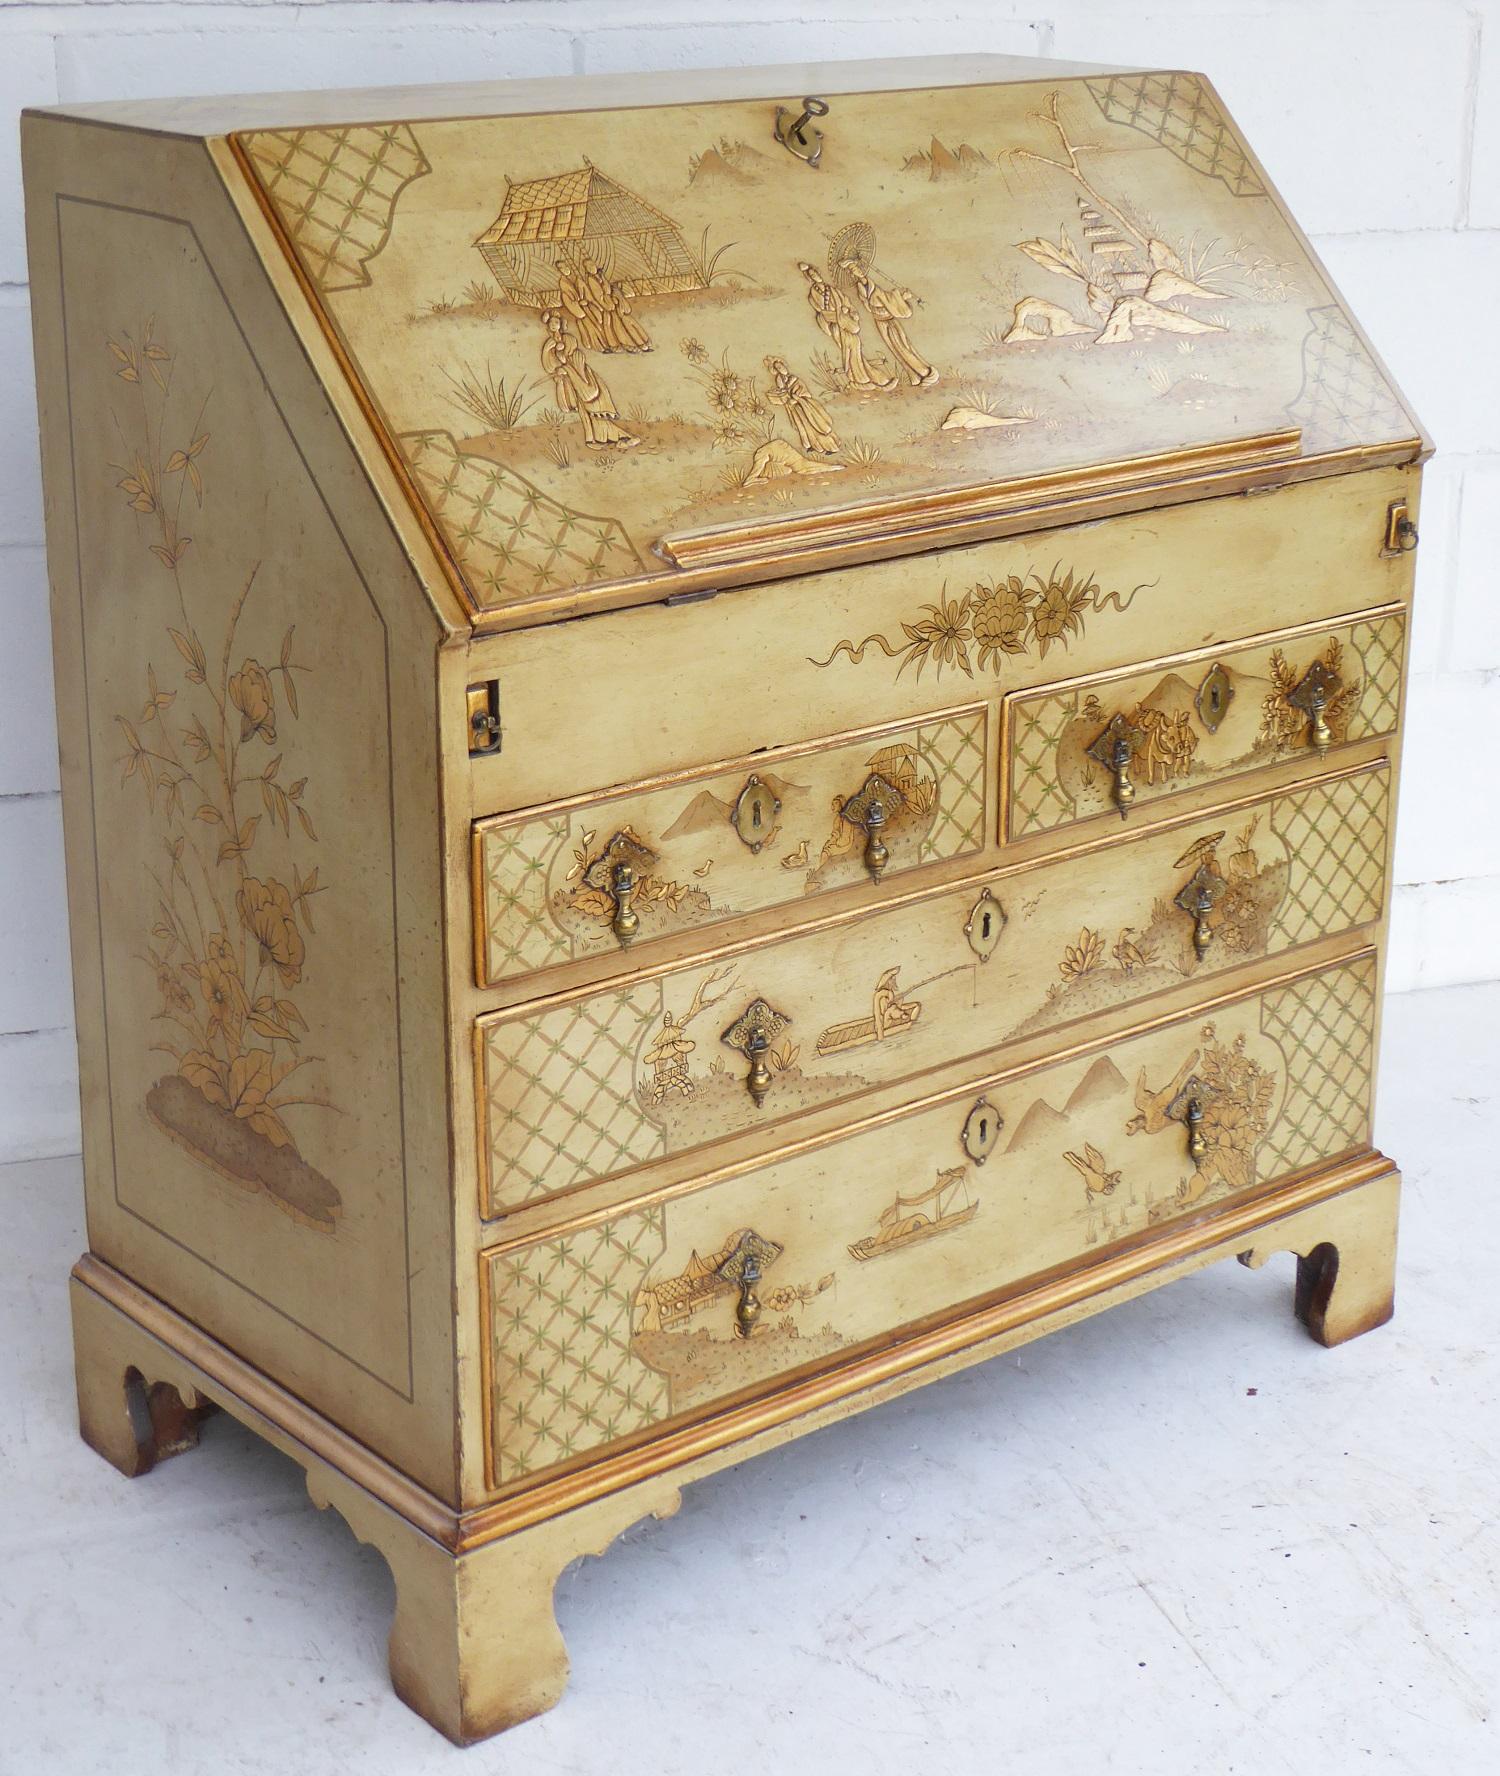 For sale is a fine quality 18th century chinoiserie Bureau. The exterior of the bureau is profusely decorated with oriental scenes. The fall front opens to reveal a fully fitted interior comprising pigeon holes, drawers, a well and a writing